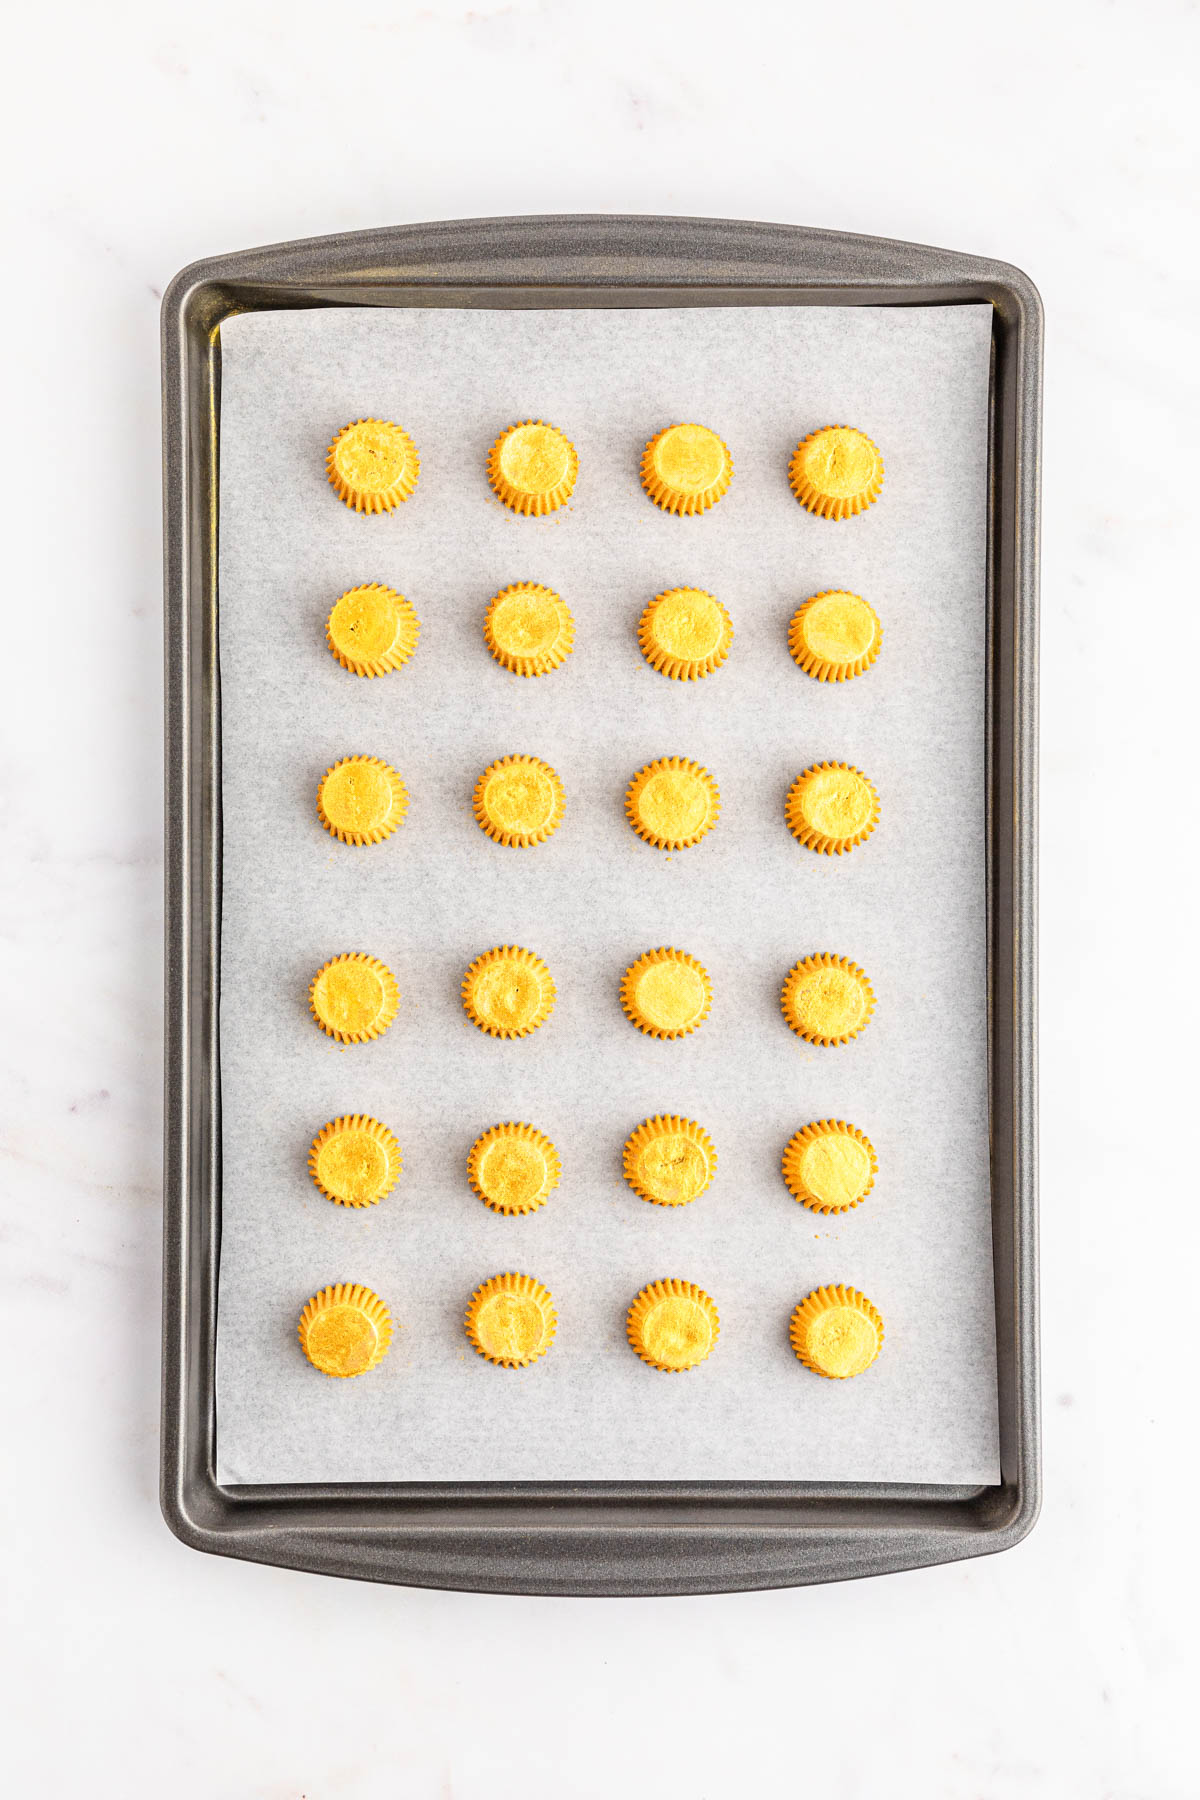 A baking sheet with yellow candies on it.